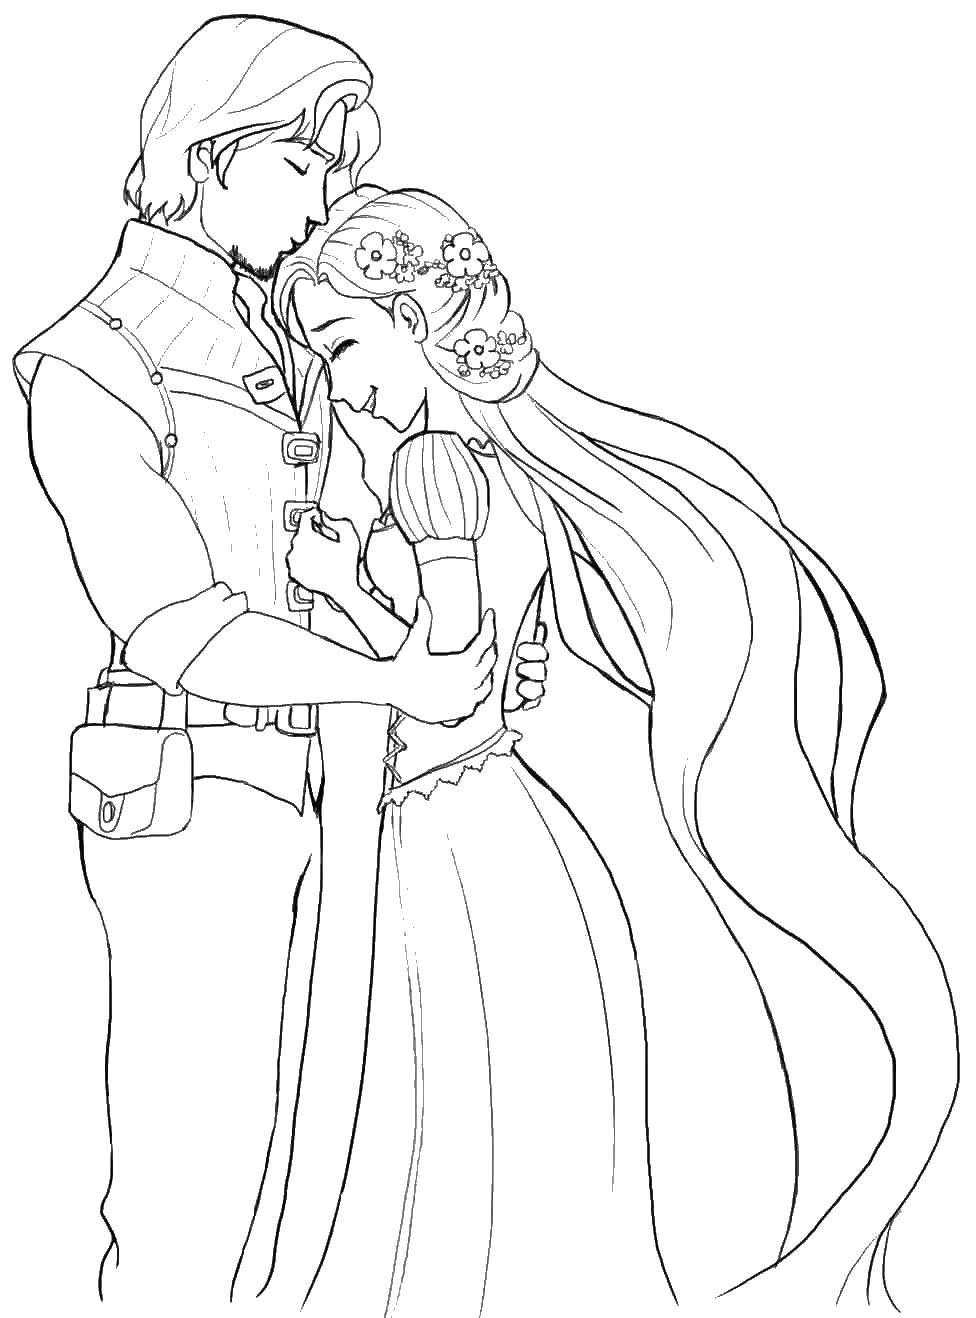 Coloring Rapunzel hugs her Prince. Category coloring pages Rapunzel tangled. Tags:  Rapunzel , the Prince.